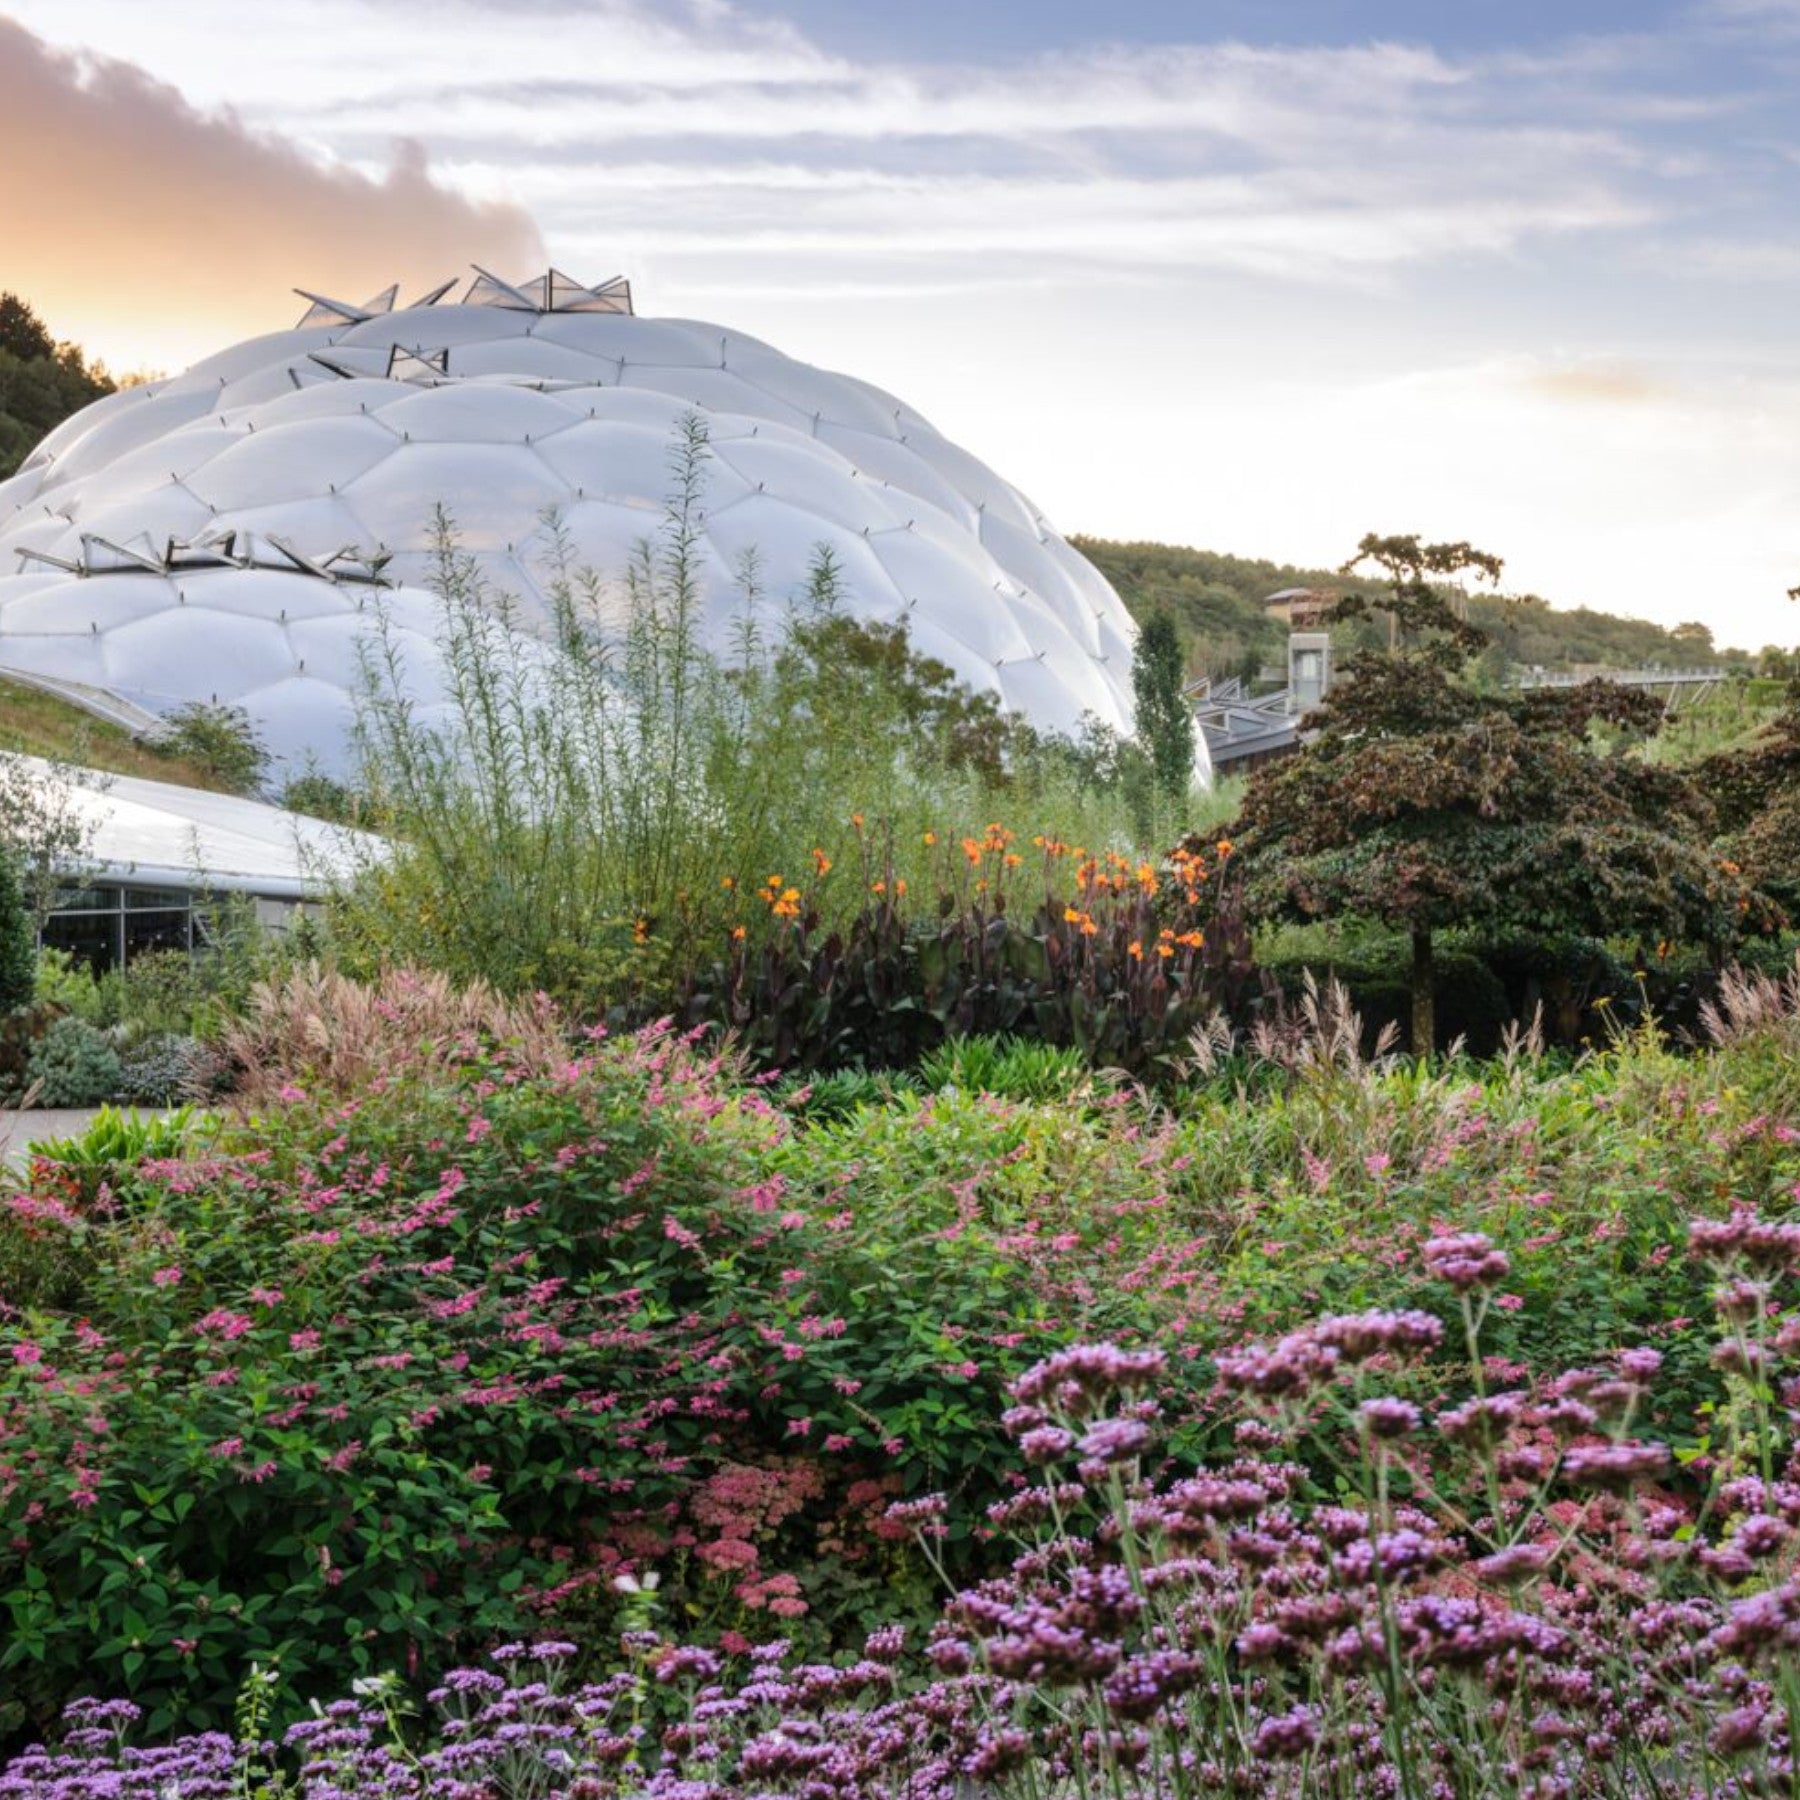 Geodesic dome amidst lush garden, biodome ecological architecture, vibrant flowering plants and greenery, sustainable living concept, tranquil nature scene at dusk.